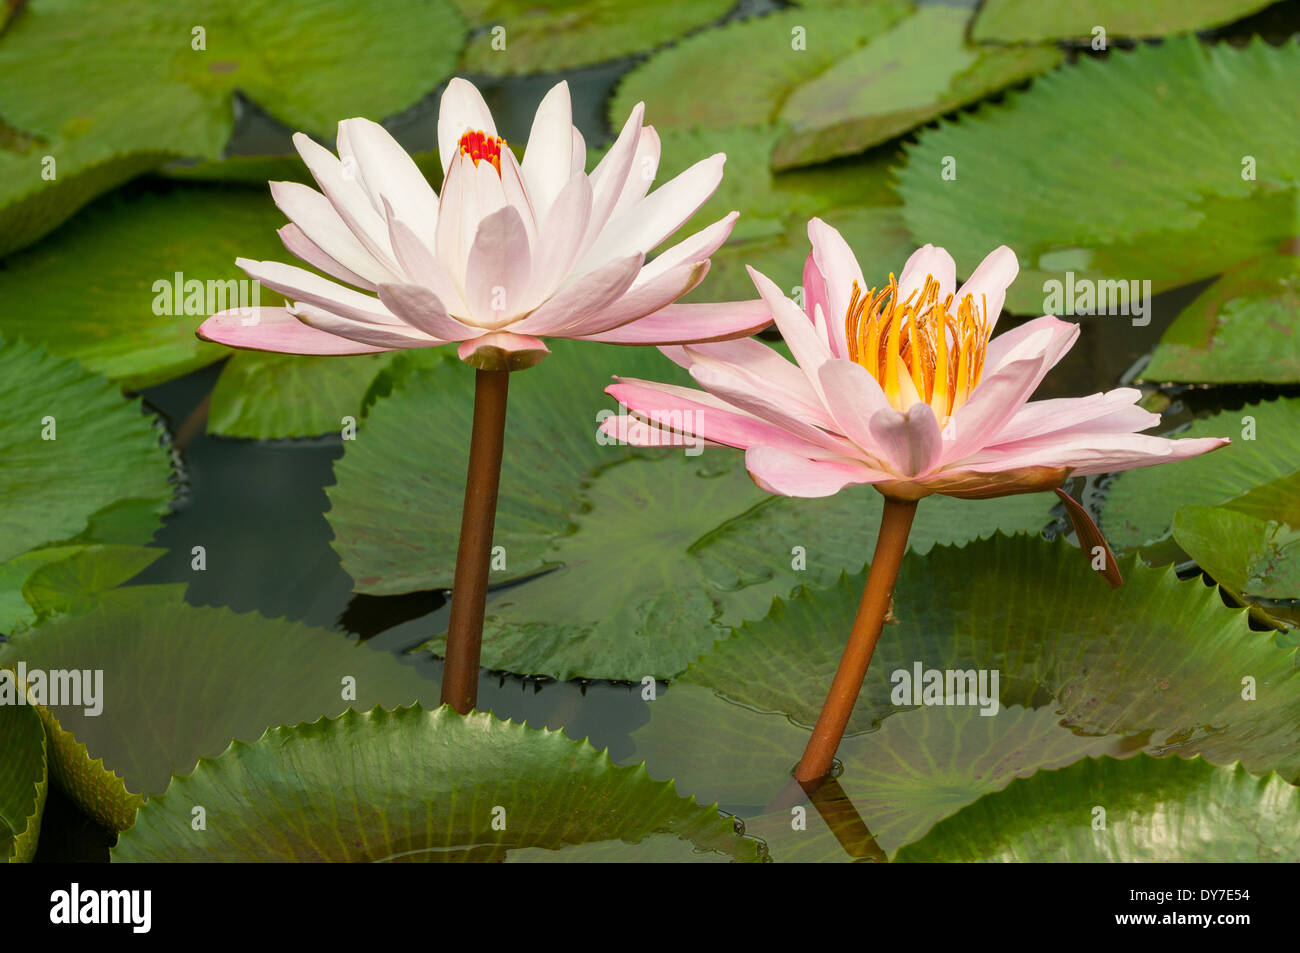 Nymphaea nouchali, Pink Water Lilies Stock Photo